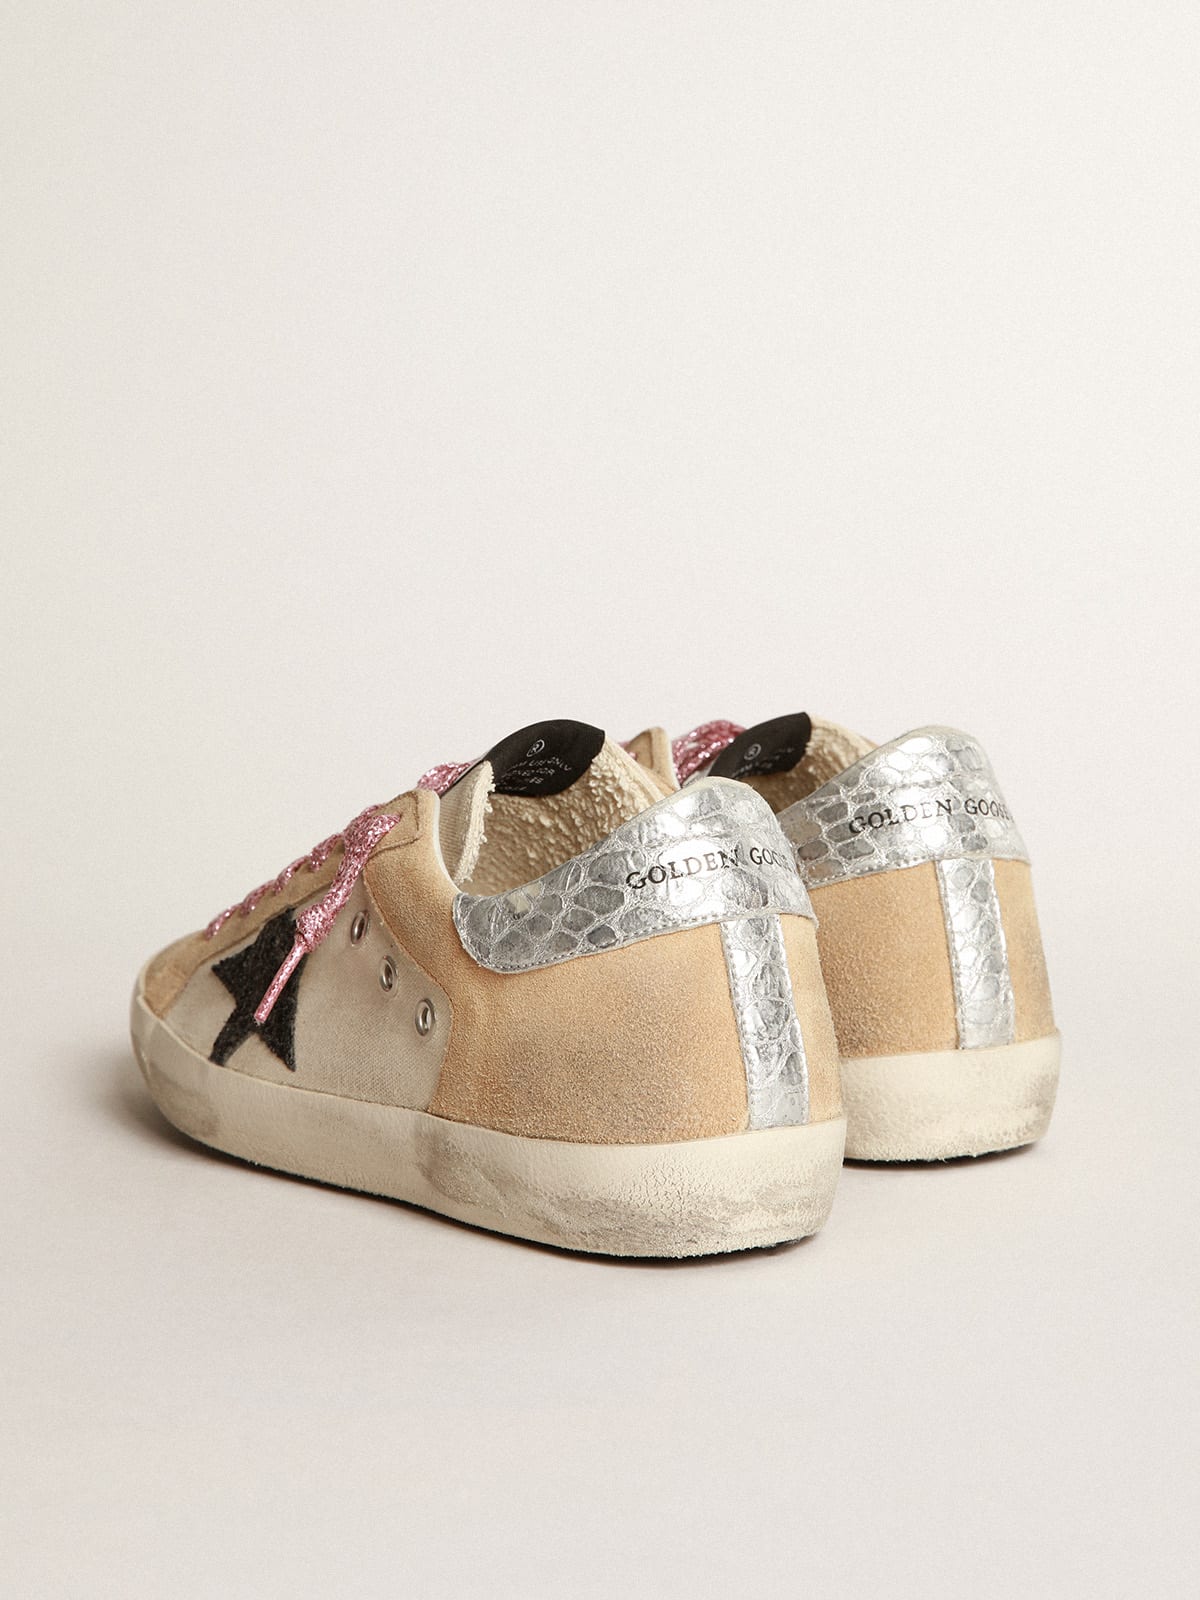 Golden Goose - Super-Star sneakers in sand-coloured suede with silver heel tab in 